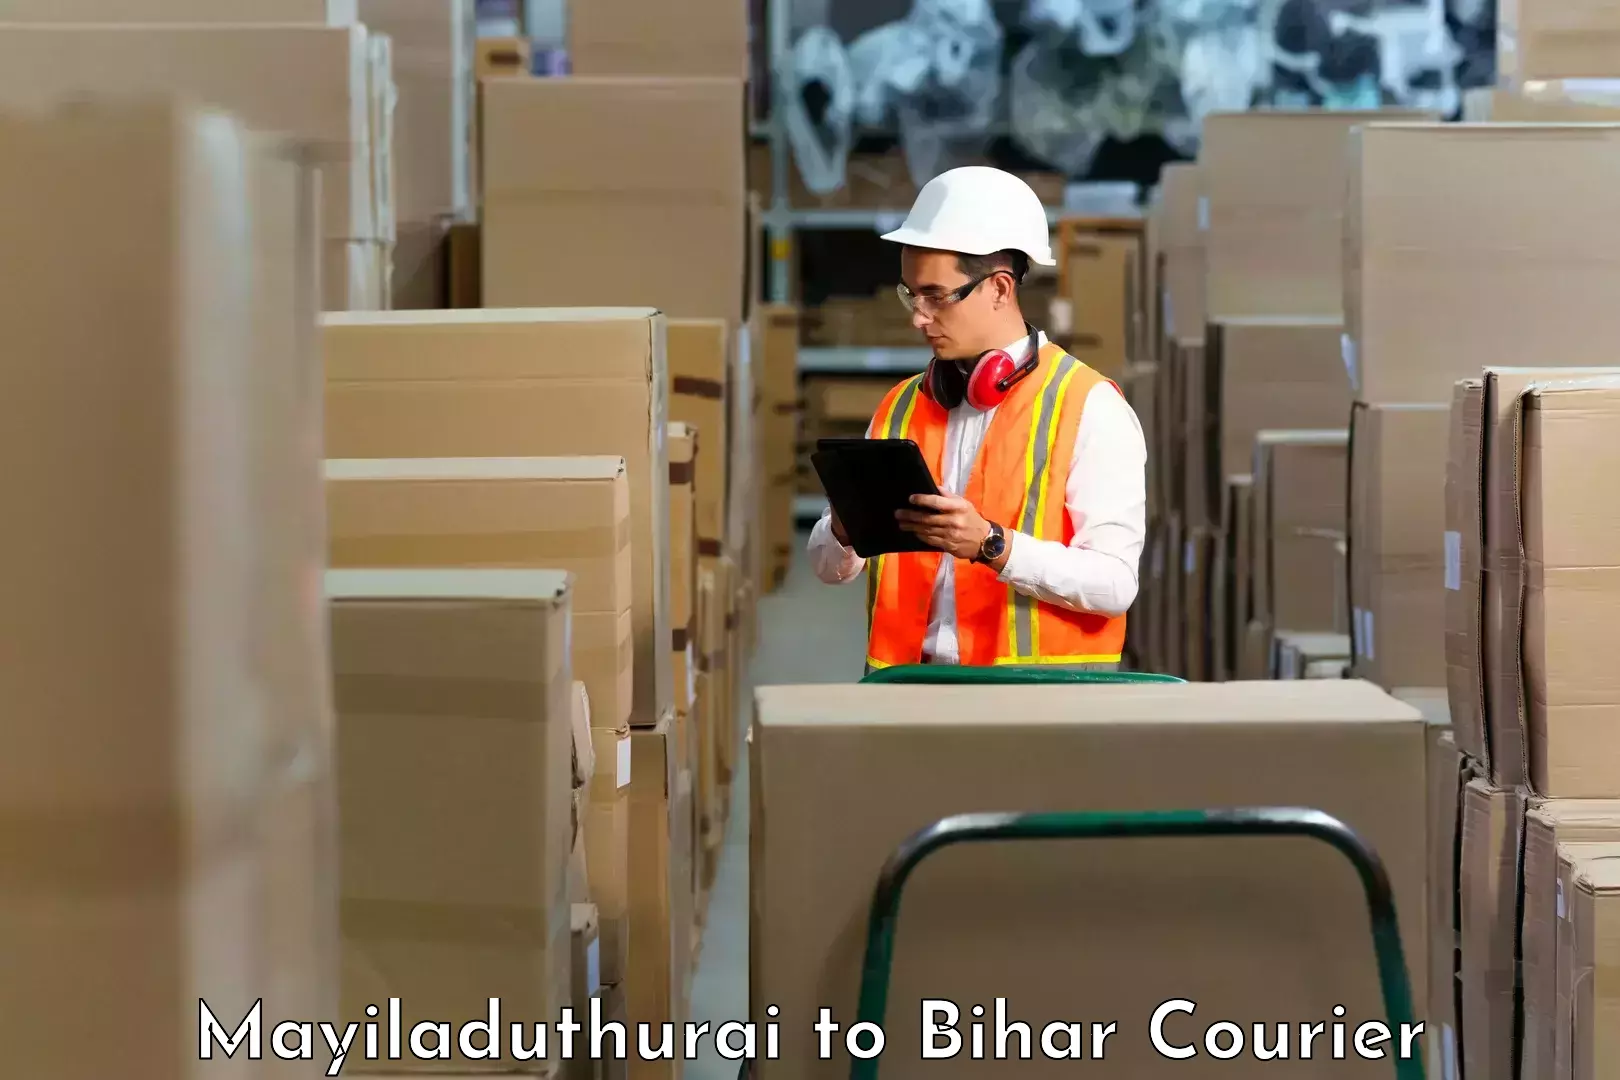 Cash on delivery service Mayiladuthurai to Bihta